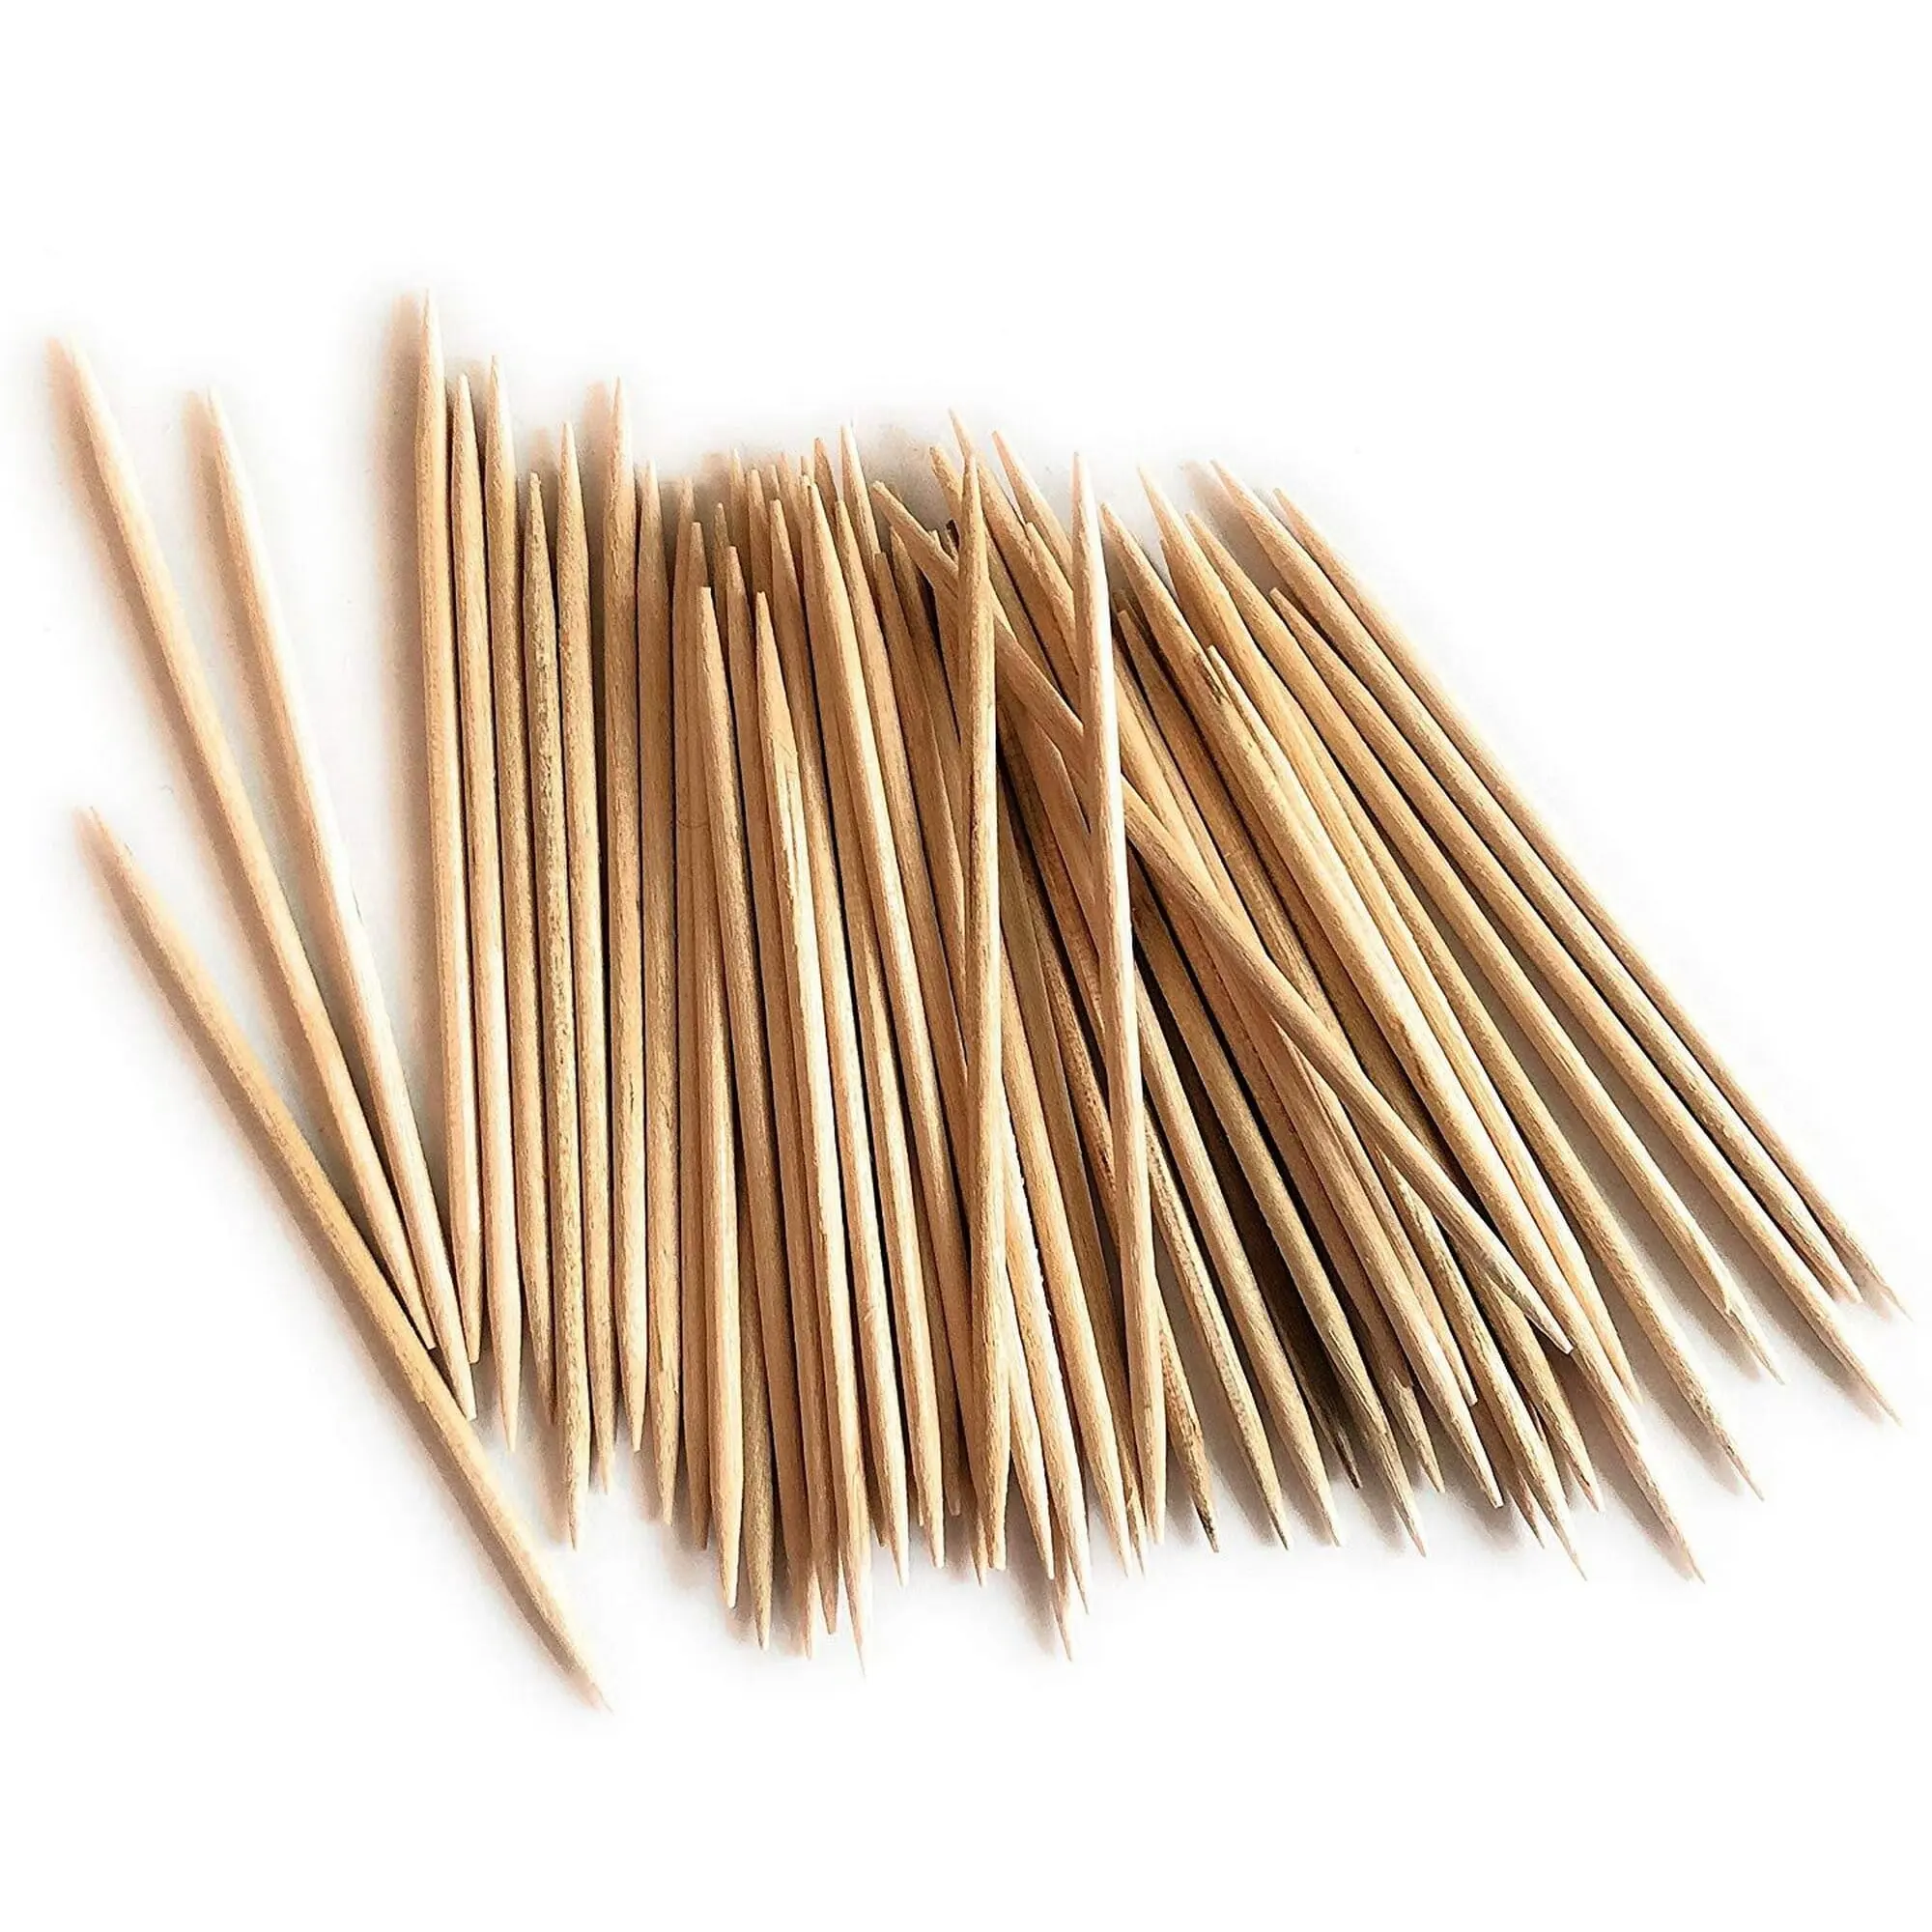 High Quality Natural Bamboo Toothpicks Handmade From Viet Nam, 100% eco-friendly high quality for wholesale Low Tax